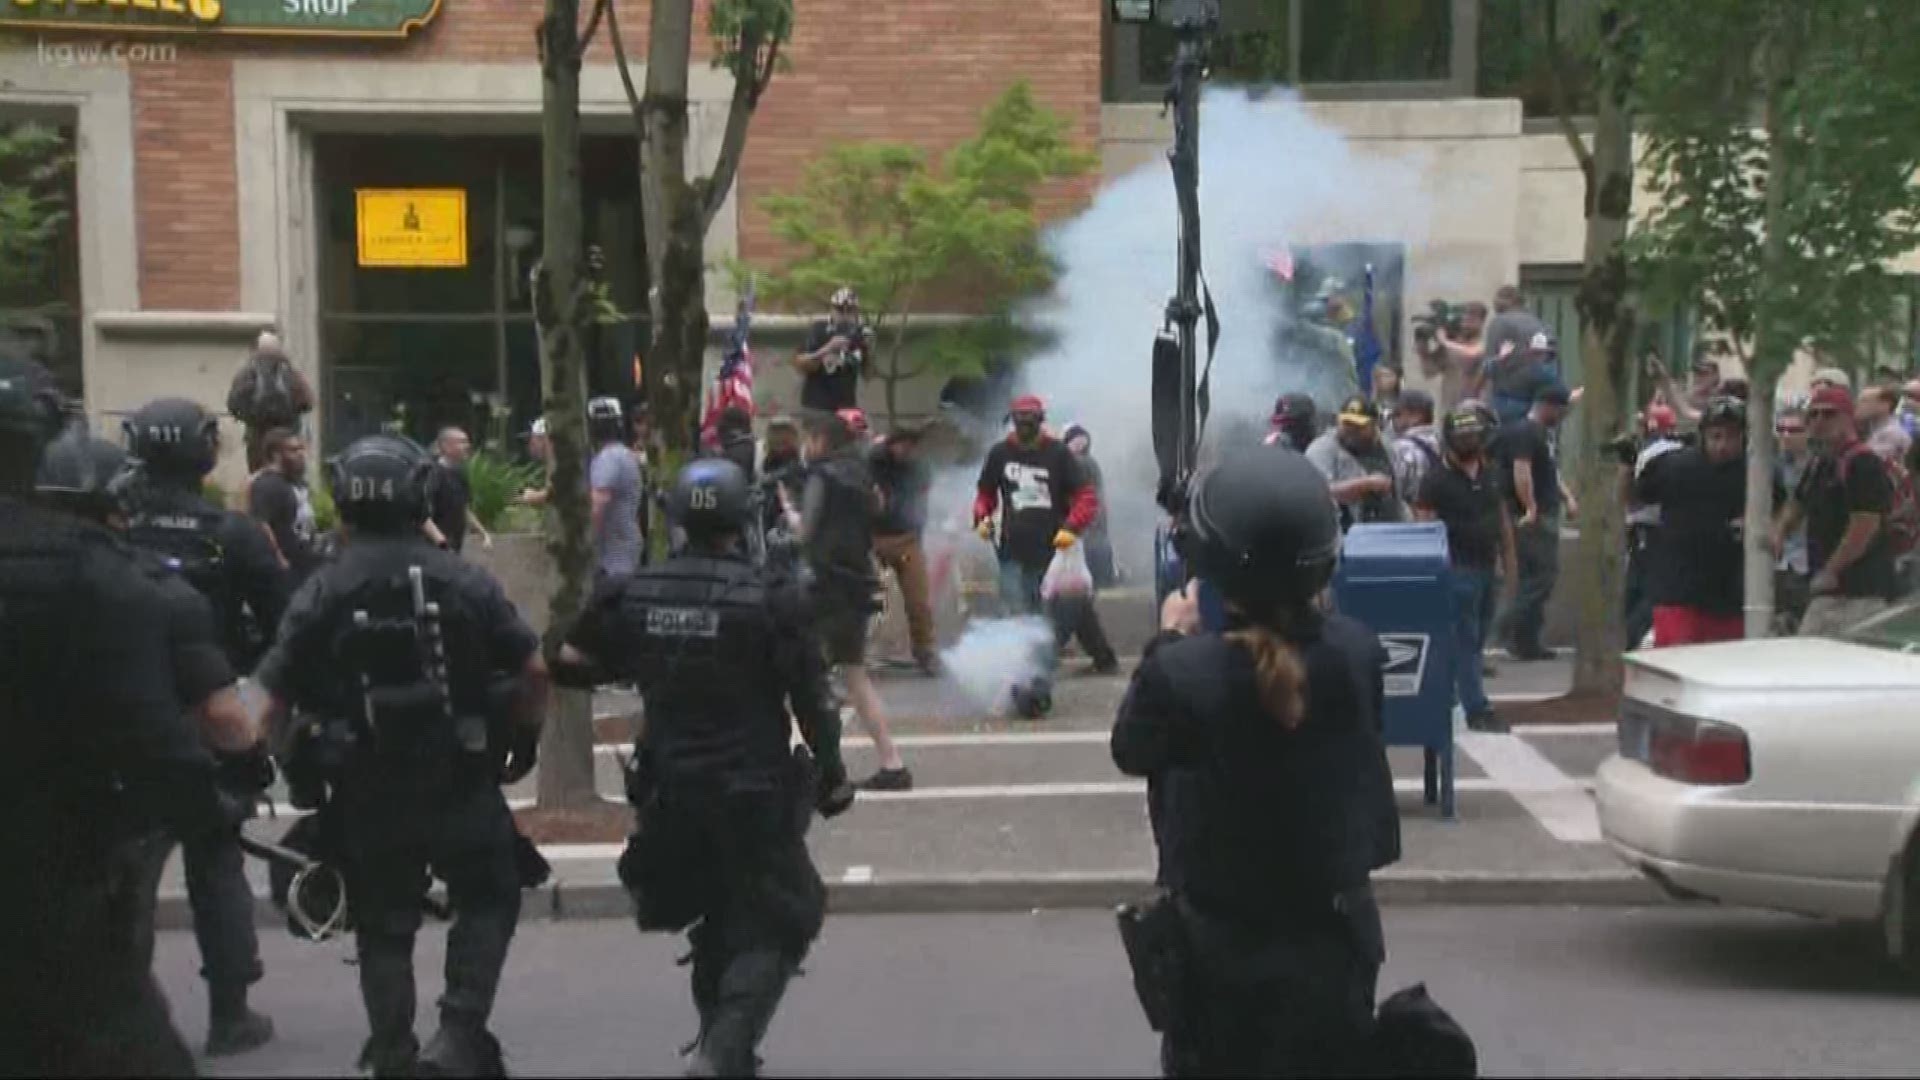 Four people arrested after dueling protests in downtown Portland on Saturday afternoon drew heavy police presence after a morning of peaceful unrelated rallies.